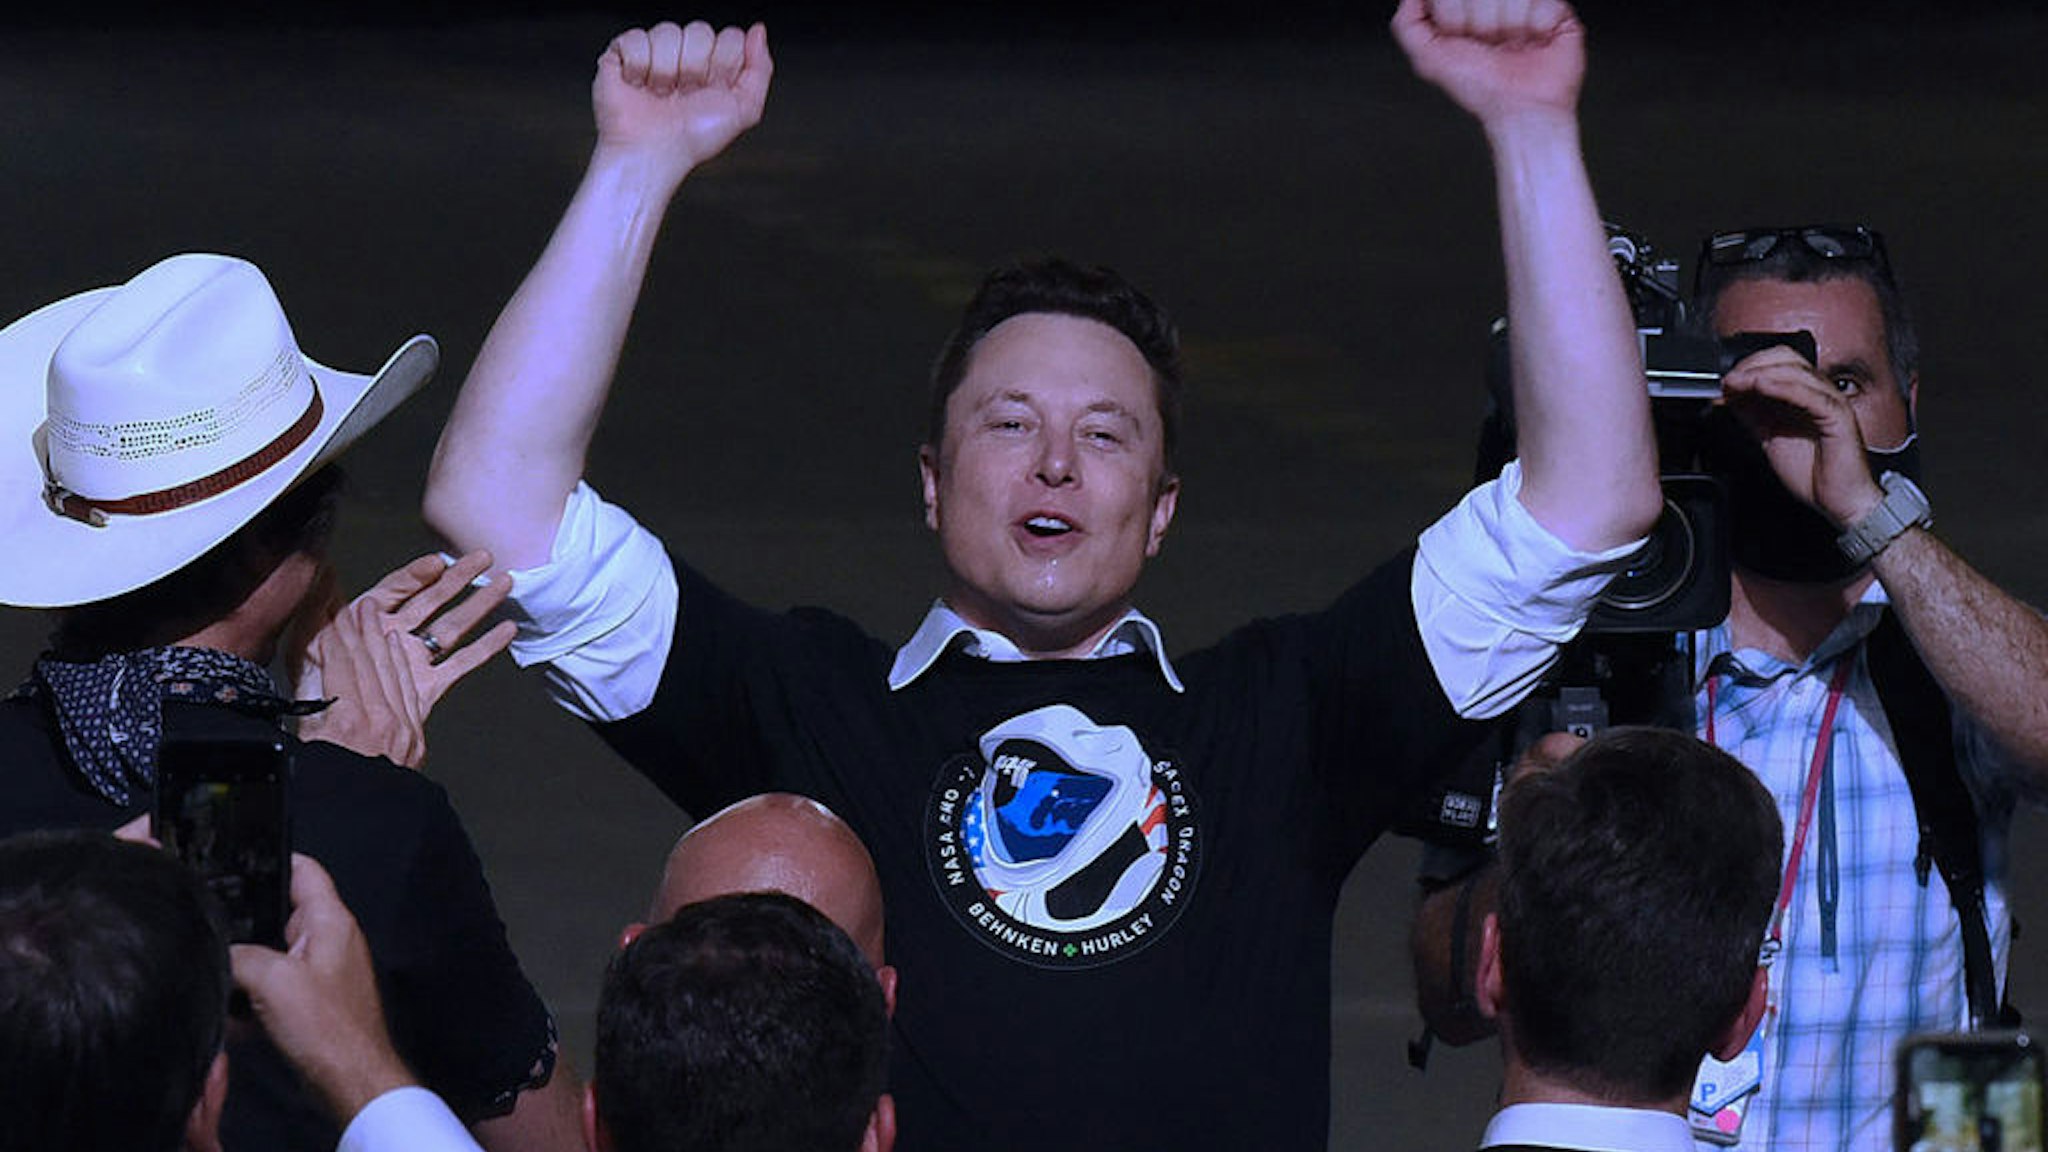 CAPE CANAVERAL, UNITED STATES - 2020/05/30: SpaceX founder Elon Musk celebrates after being recognized by U.S. Vice President Mike Pence at NASA's Vehicle Assembly Building following the successful launch of a Falcon 9 rocket with the Crew Dragon spacecraft from pad 39A at the Kennedy Space Center.